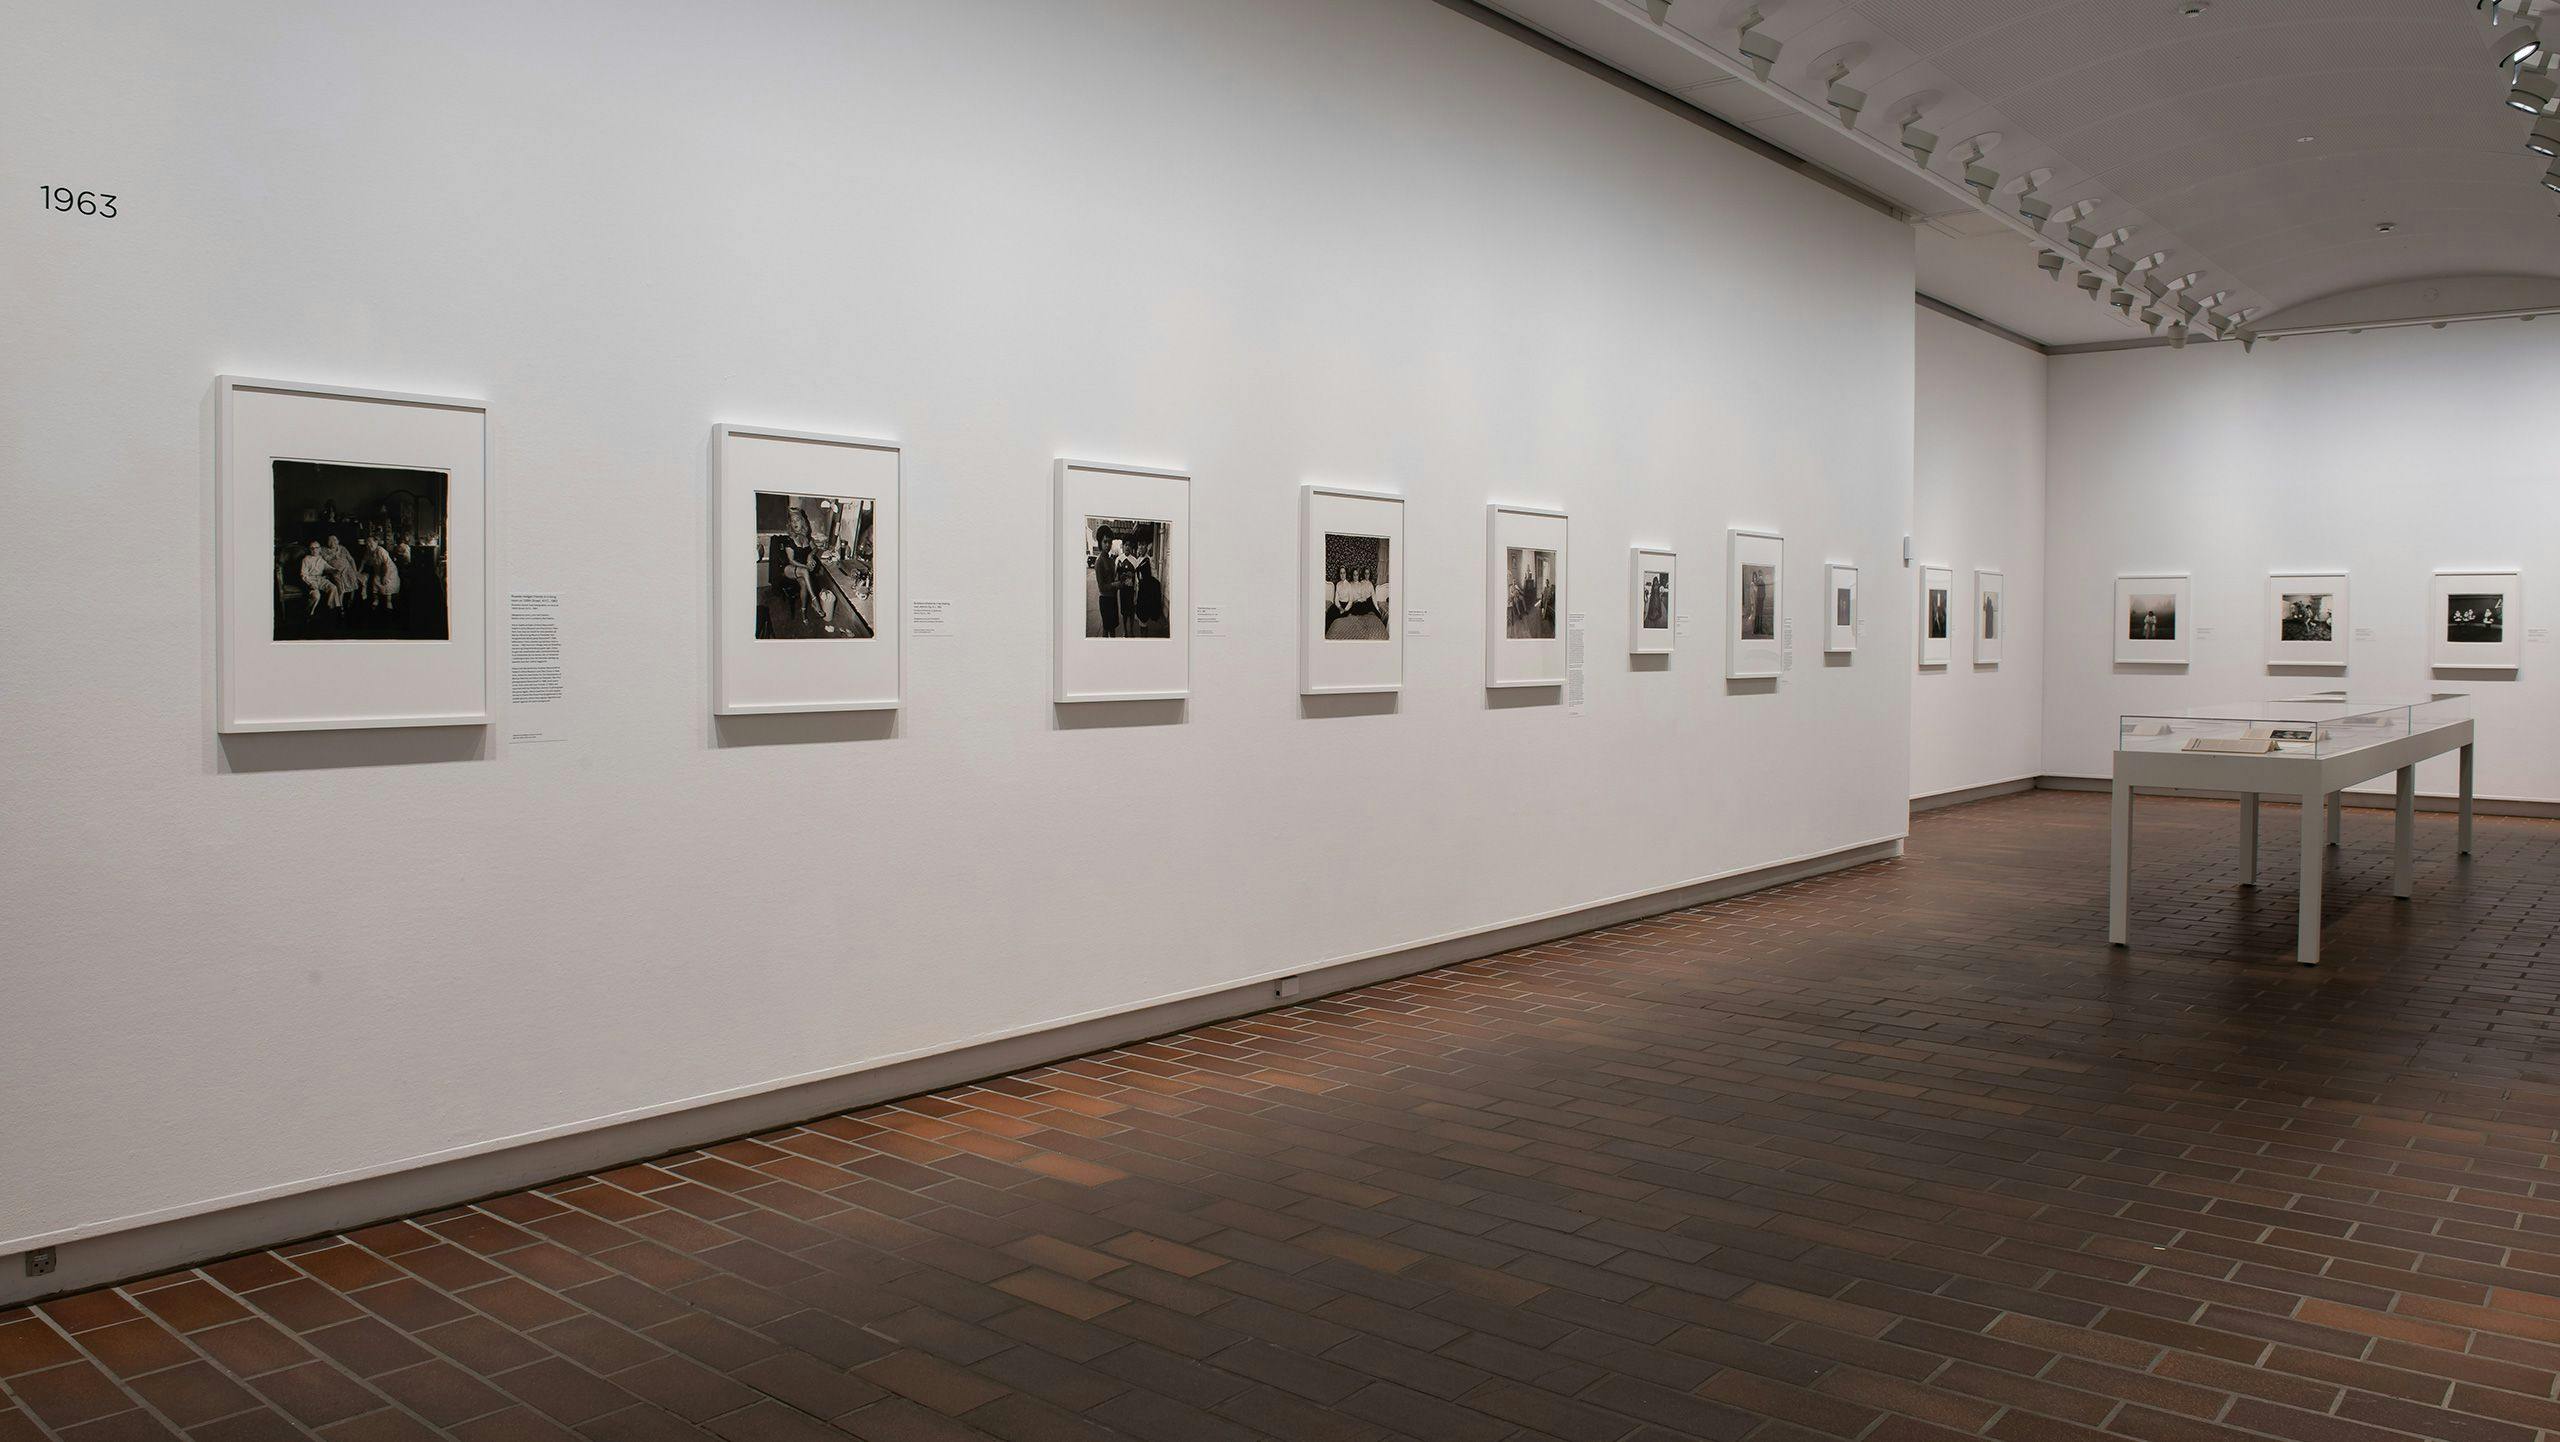 Installation view of the exhibition, Diane Arbus: Photographs, 1956–1971, at the Louisiana Museum of Modern Art in Humlebæk, Denmark, dated 2022.